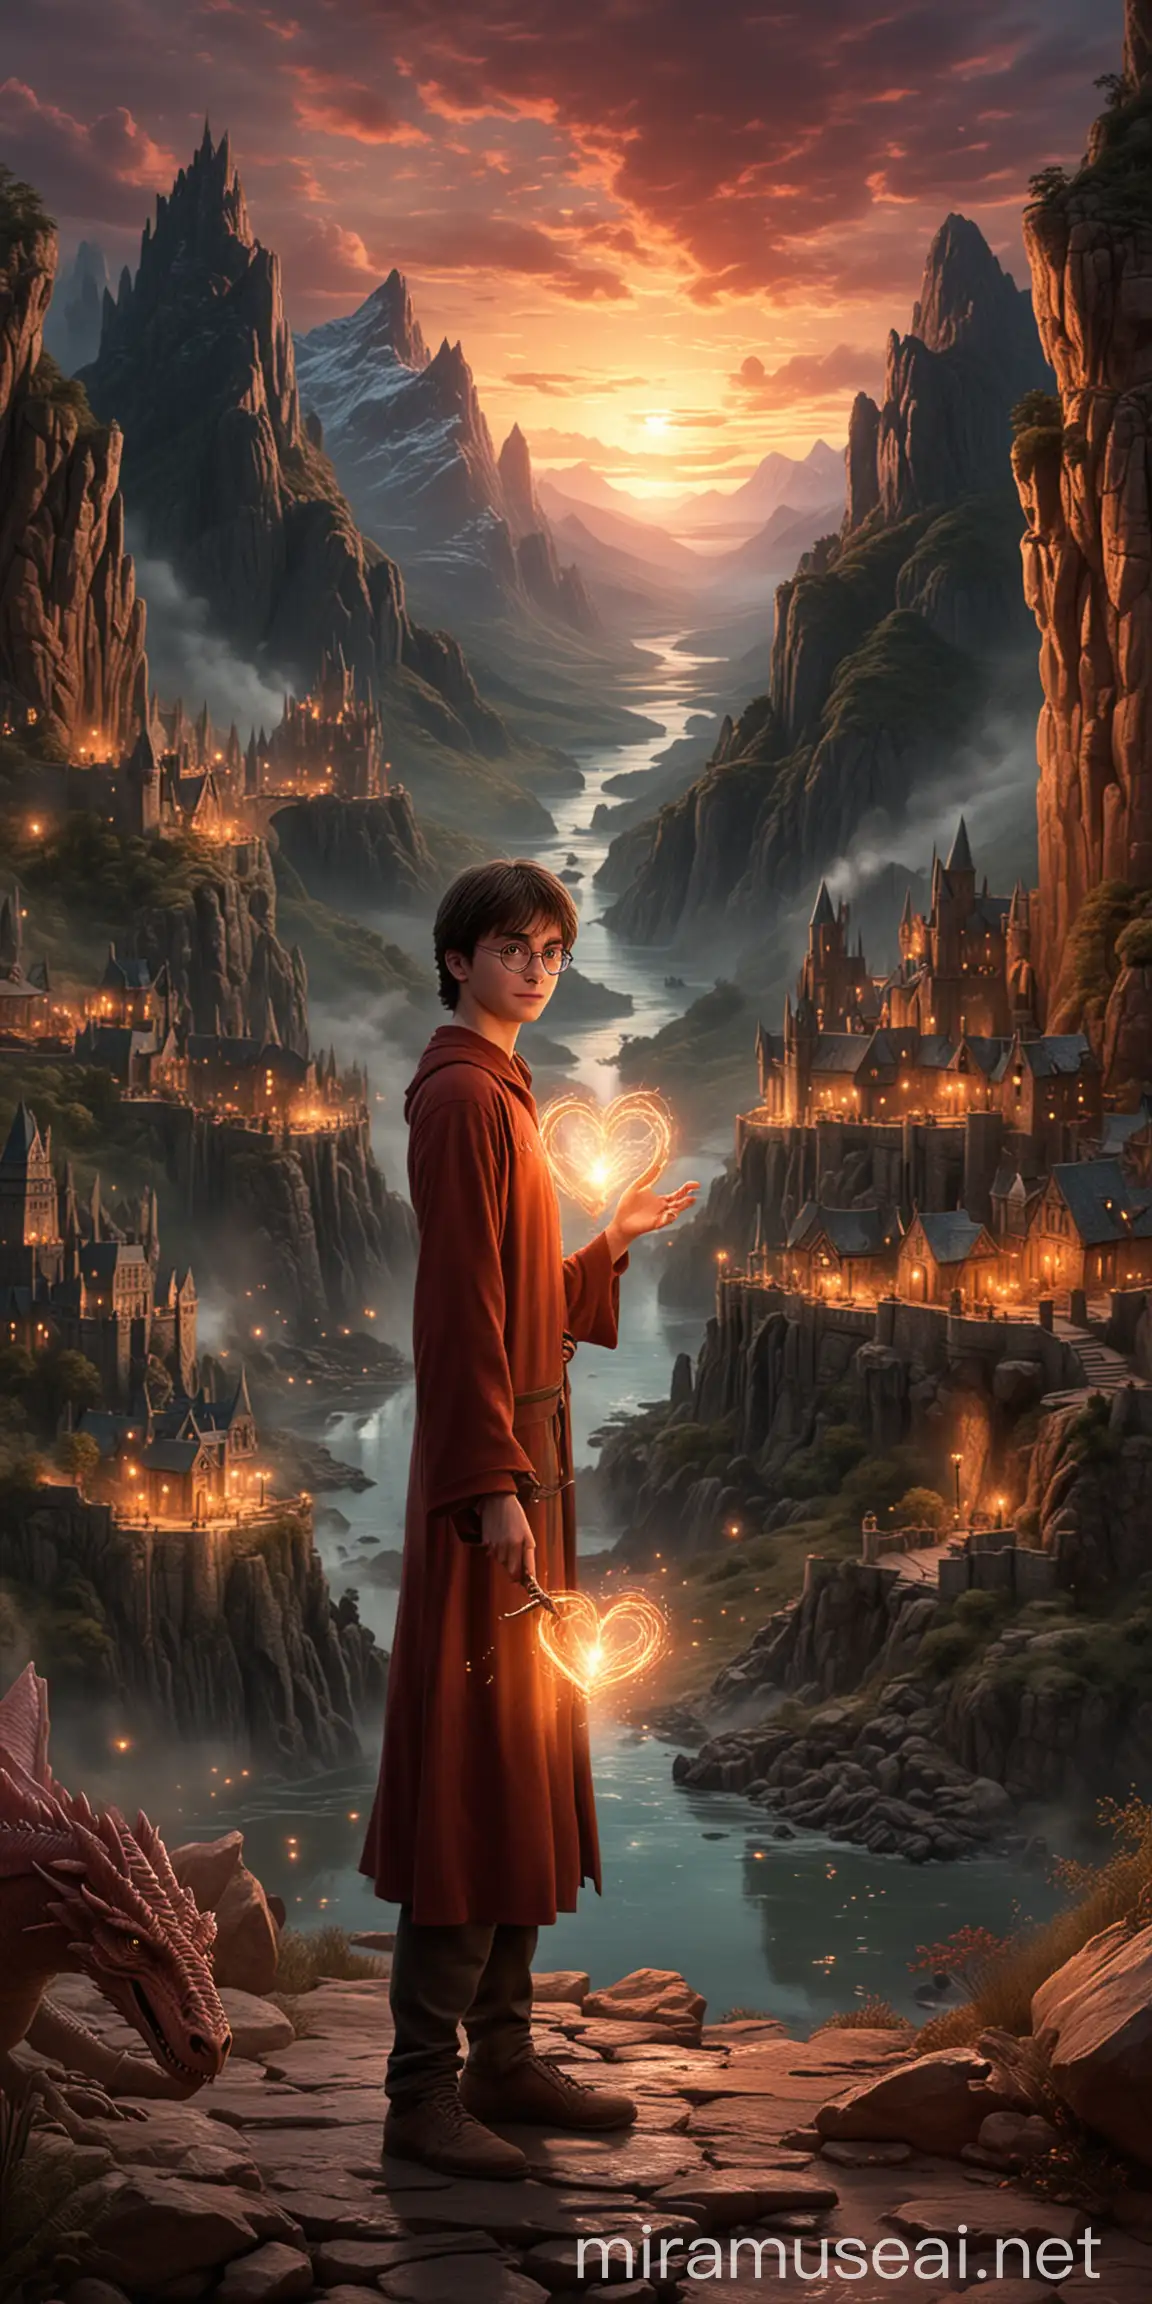 Harry Potter character holds a glowing heart in his hands The background of the image is mythical realm from Game of Thrones, with elements of the House of the Dragon. This setting enhances the mystical atmosphere, combining ancient architecture and dramatic landscapes. background detail: rugged mountains, cascading dragon falls and ancient ruins are shrouded in a magical twilight glow. 